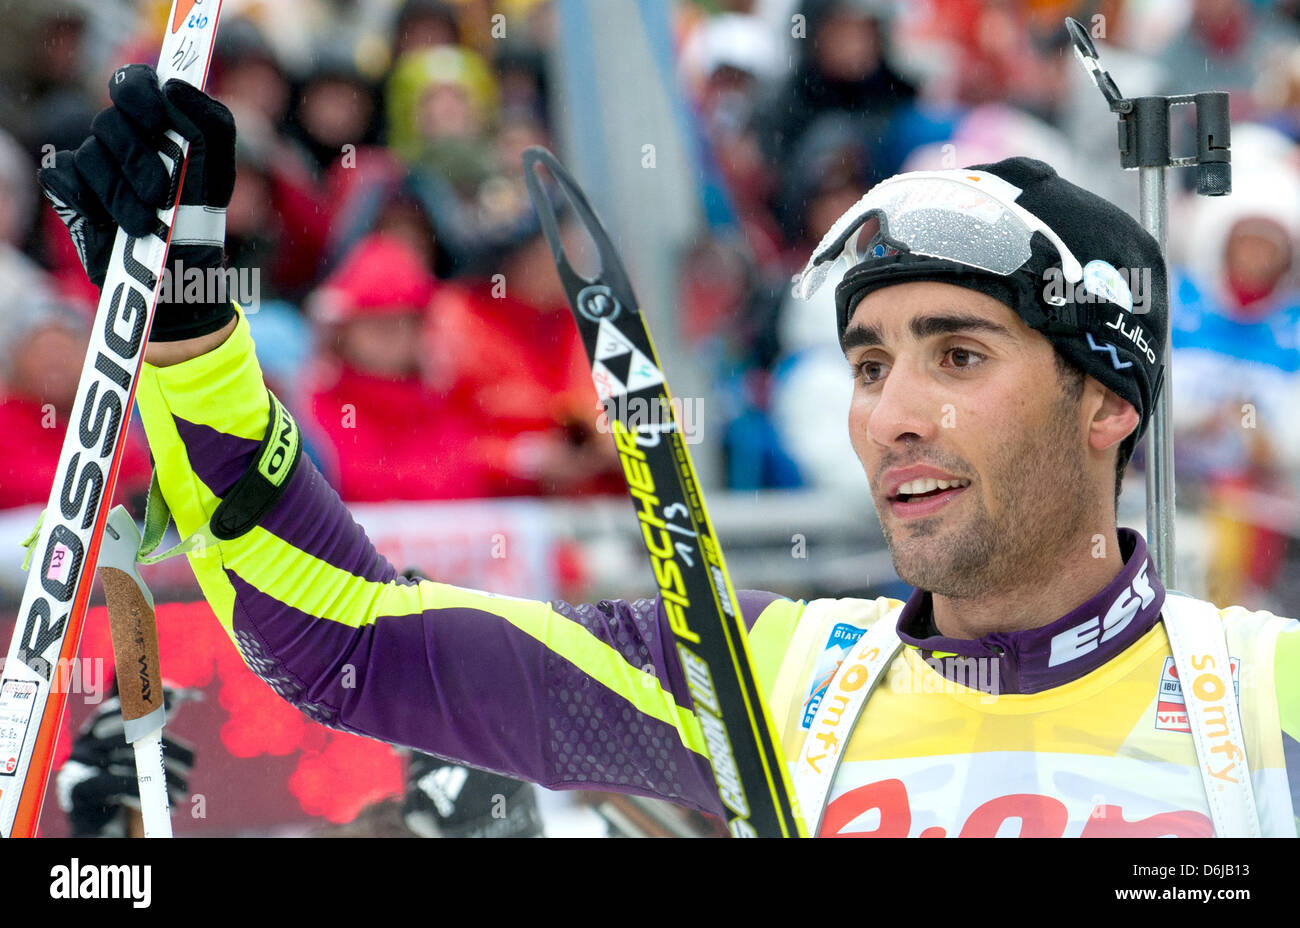 French biathlete Martin Fourcade cheers at the finishing line of the men's  15km mass start competition of the 2012 Biathlon World Championships at  Chiemgau Arena in Ruhpolding, Germany, 11 March 2012. Fourcade